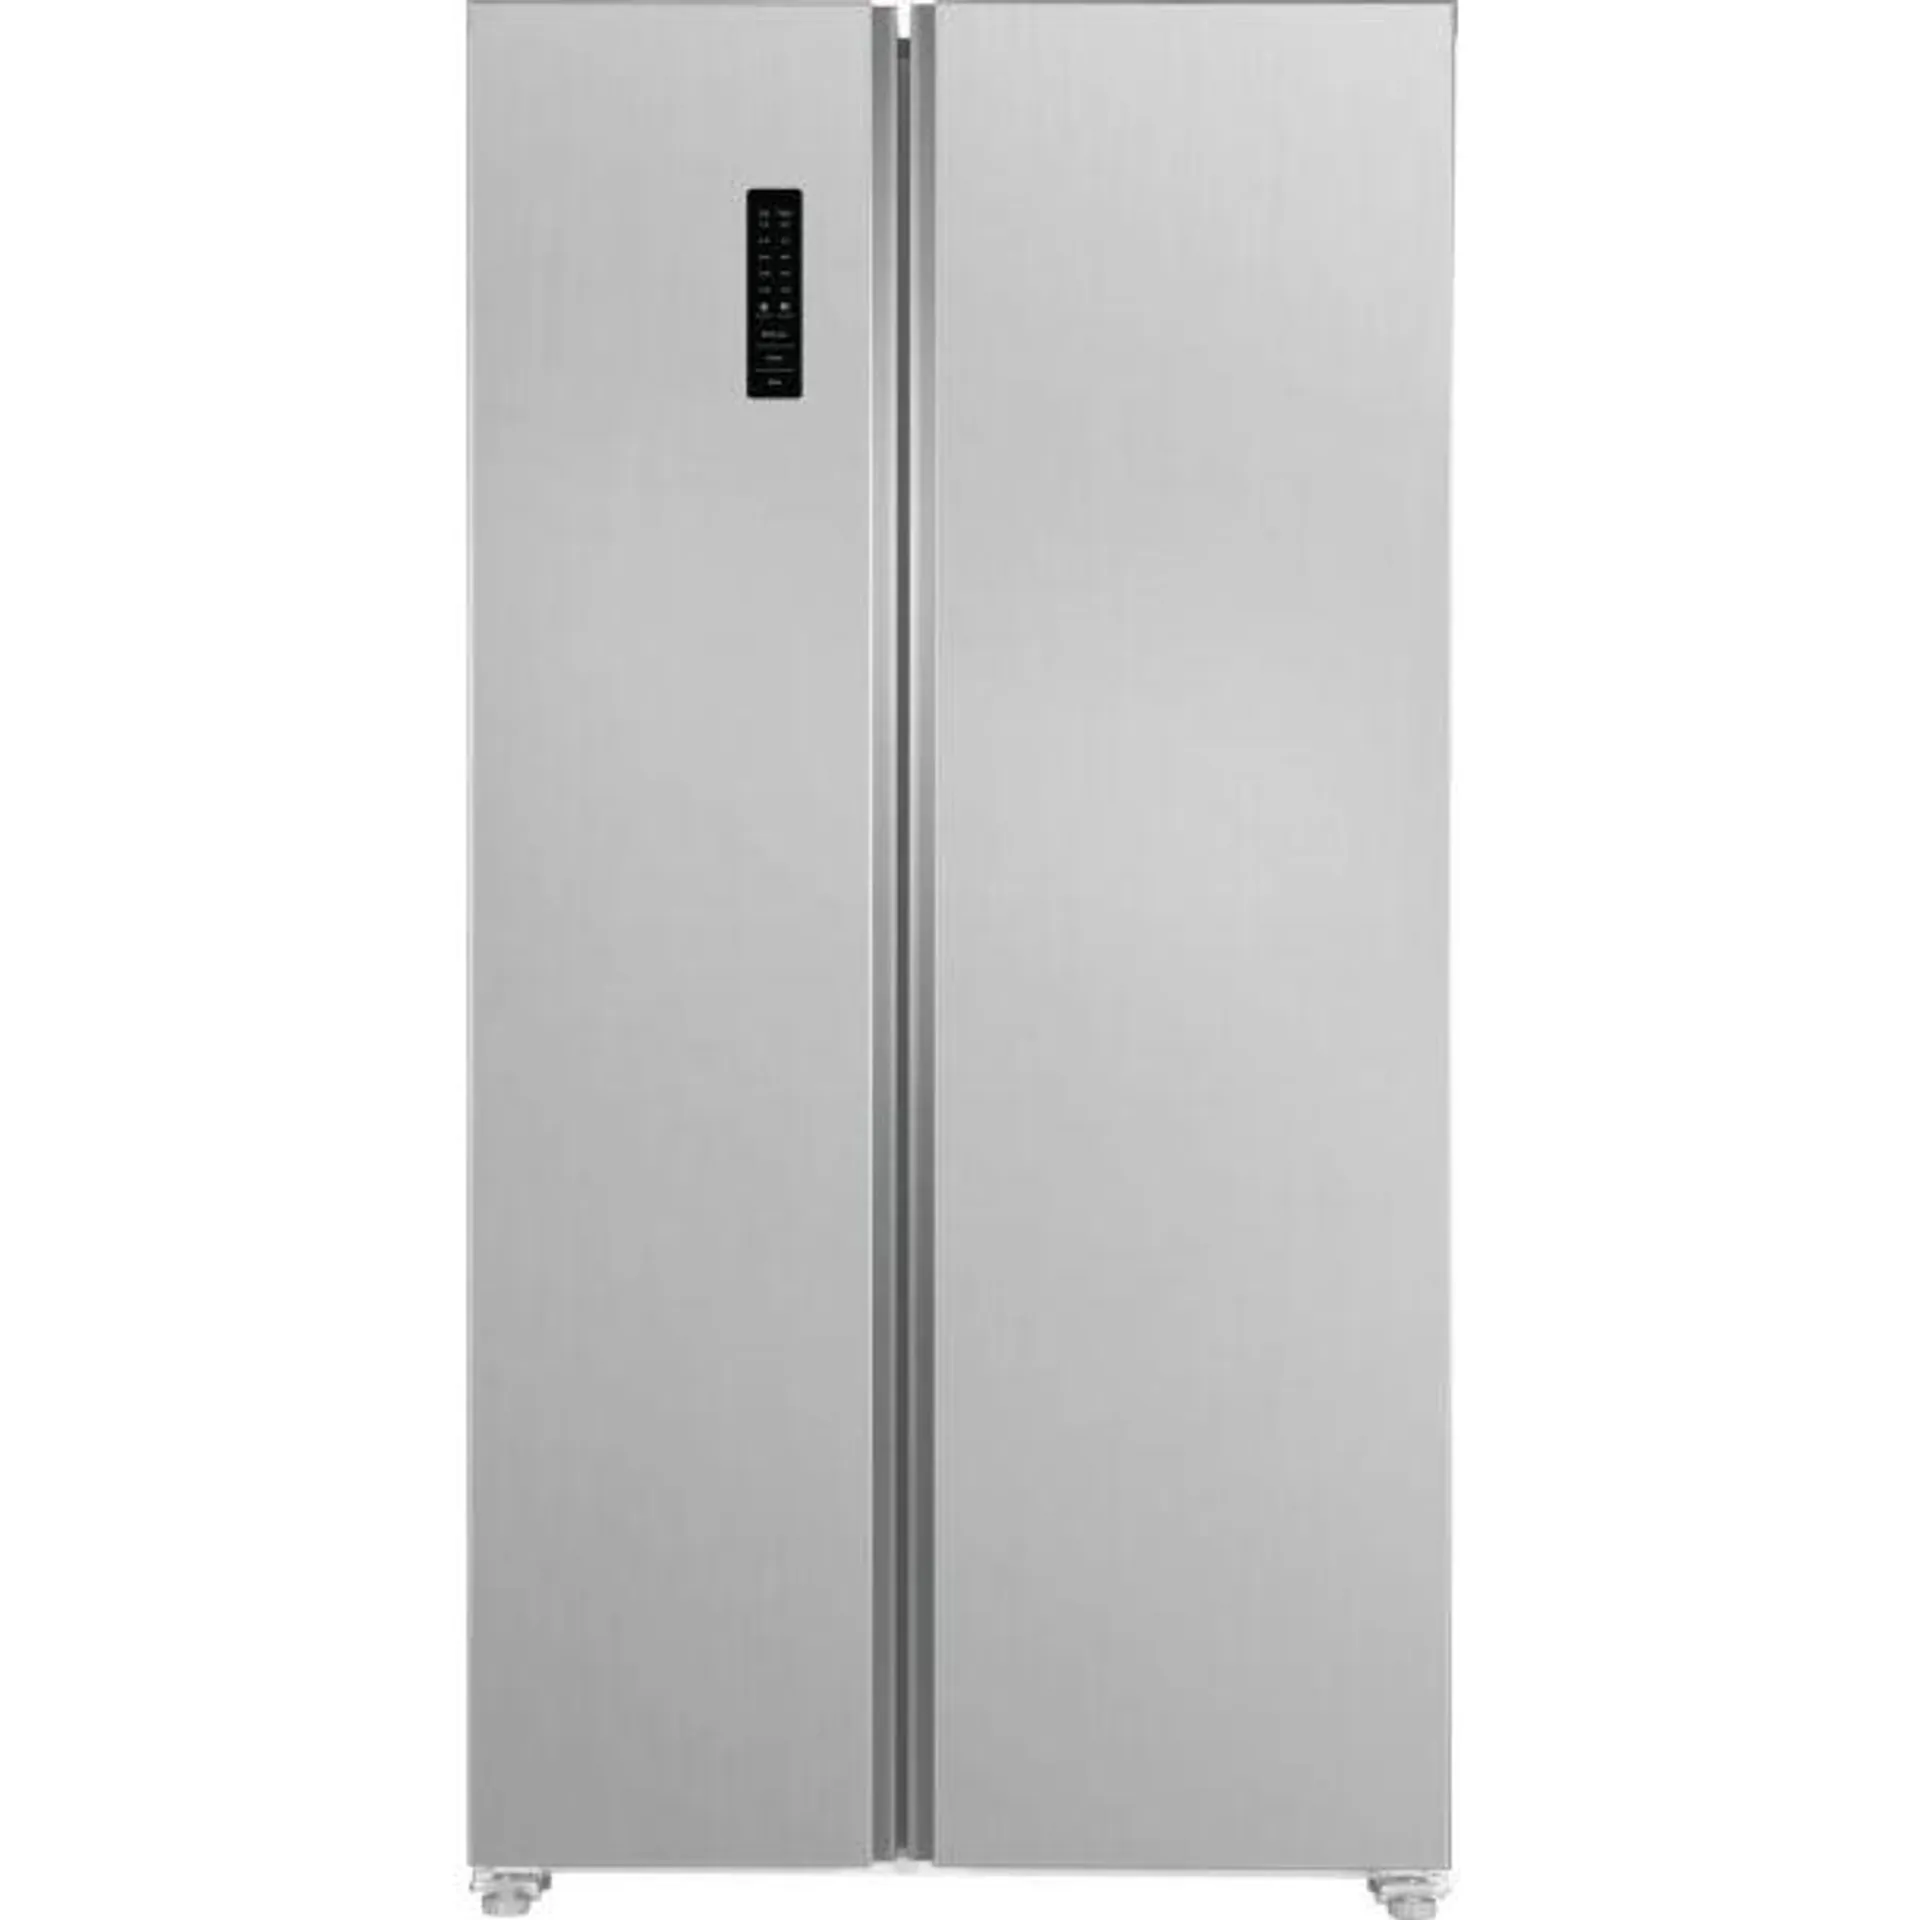 Frigidaire 18.8 cu. ft. Side by Side Refrigerator - Brushed Stainless Steel